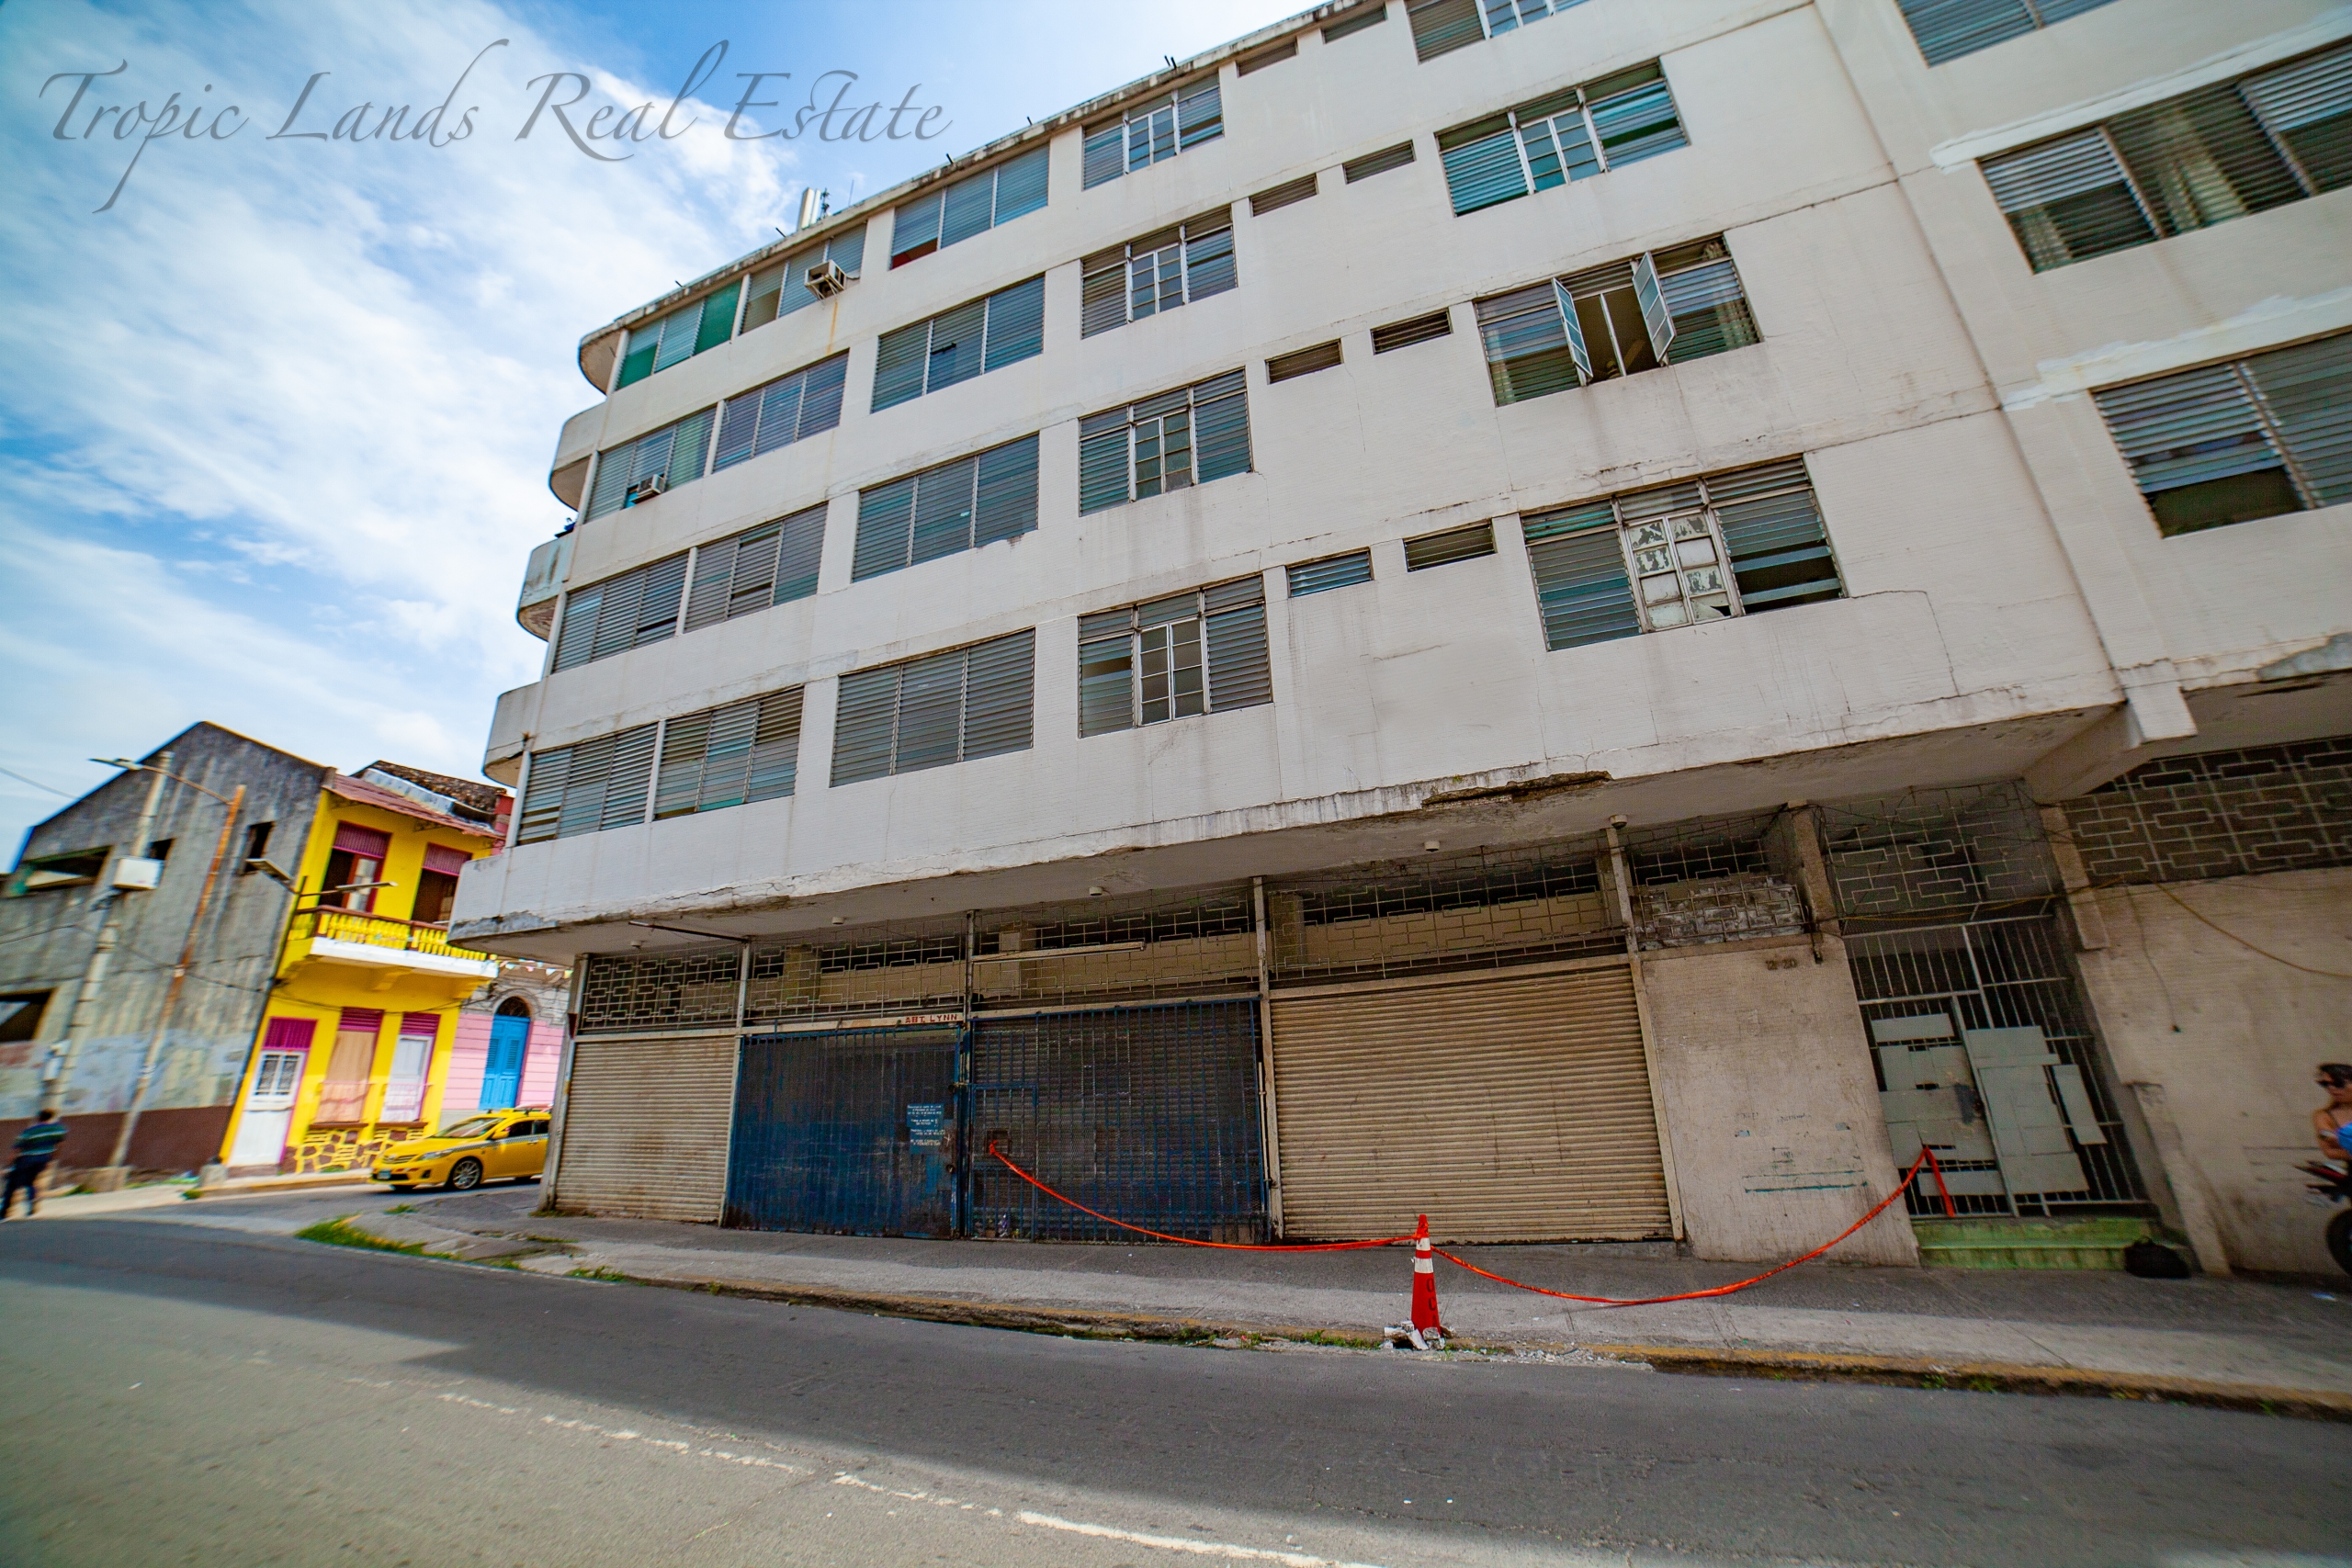 commercial & residential property for sale in casco viejo panama edificio comercial apartment building investment property